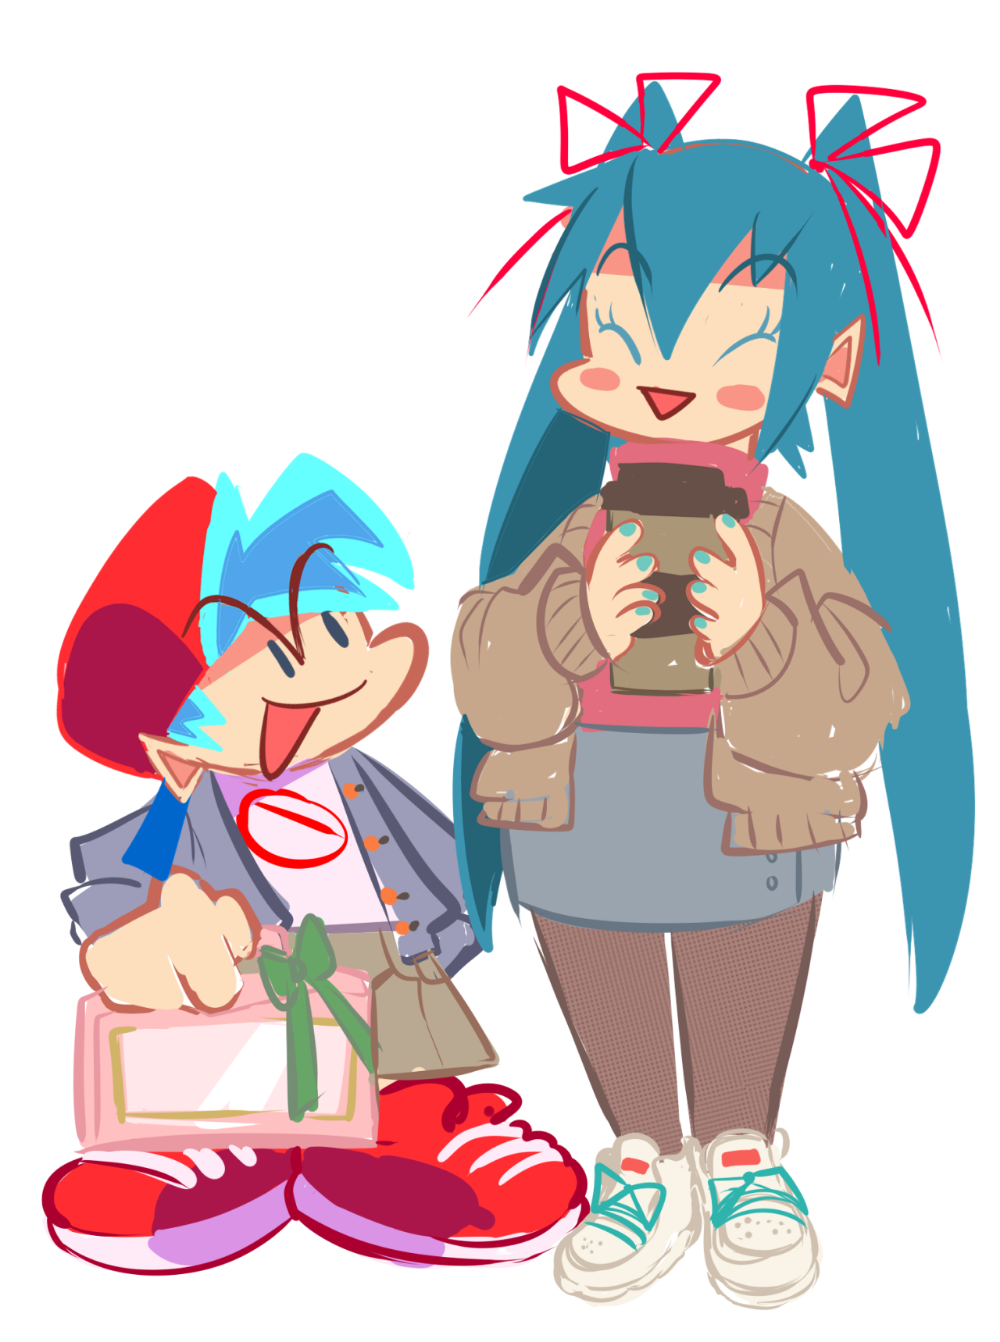 Miku wants to spend time with her little brother. Friday night, Funkin, Night